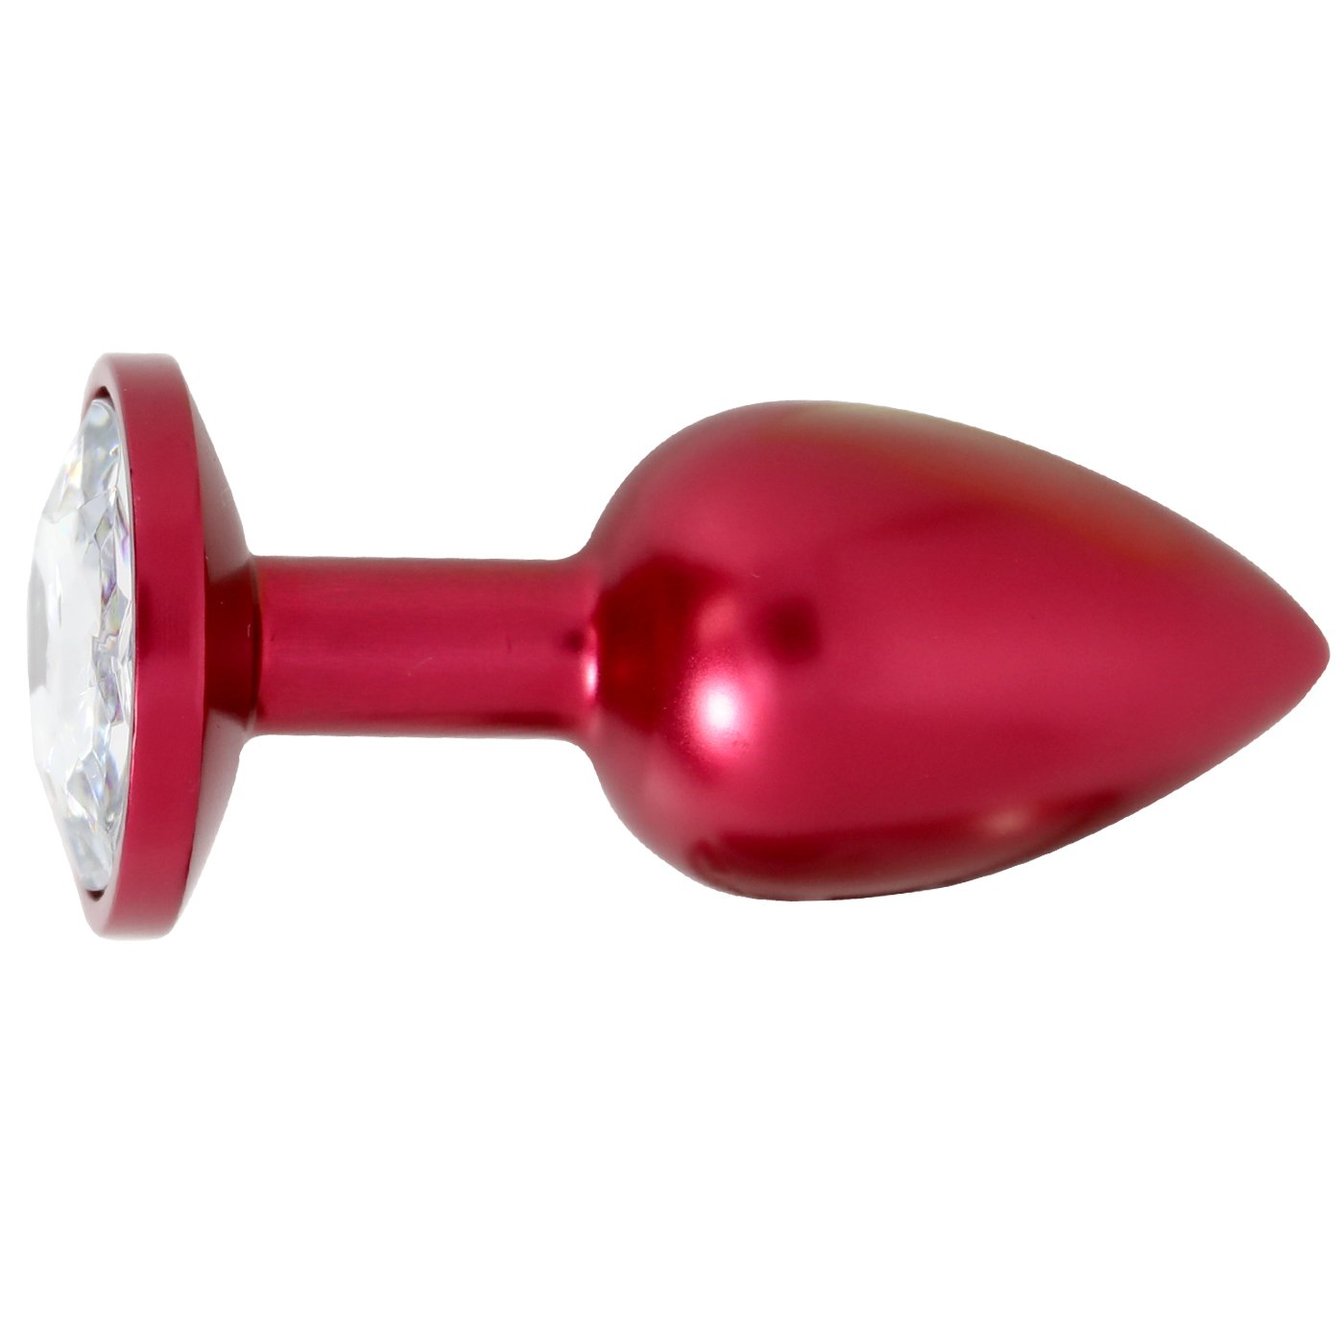 Jeweled Aluminum Anal Plug - Great for Temperature Play!-BestGSpot